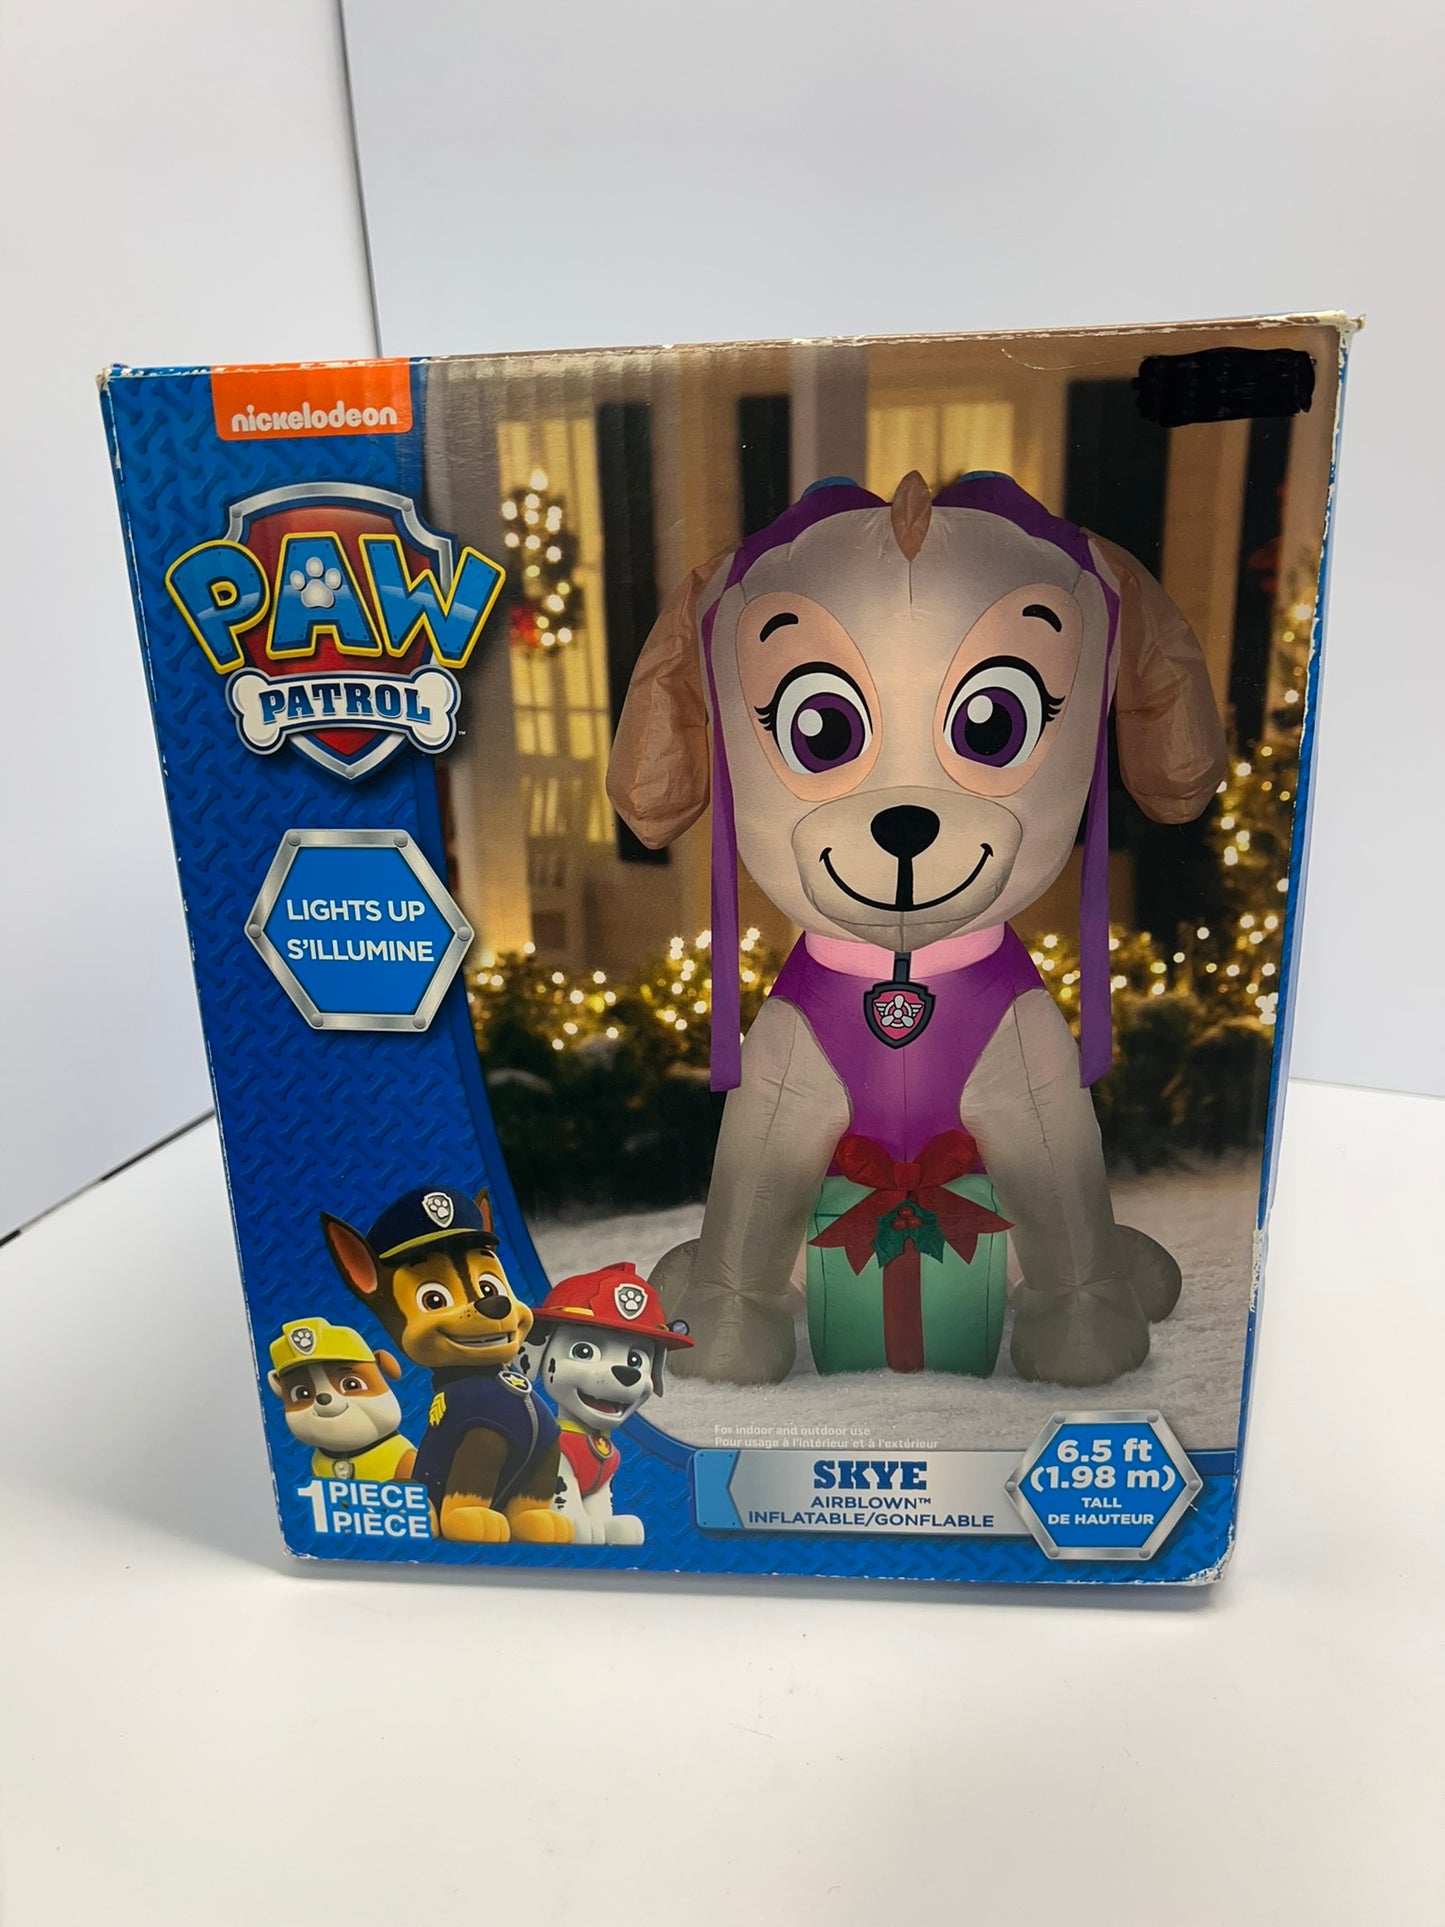 Christmas Outdoor Decoration Paw Patrol 6.5 Feet Tall Skye Lights Up AirBlown Inflatable Never Used Sealed In Box